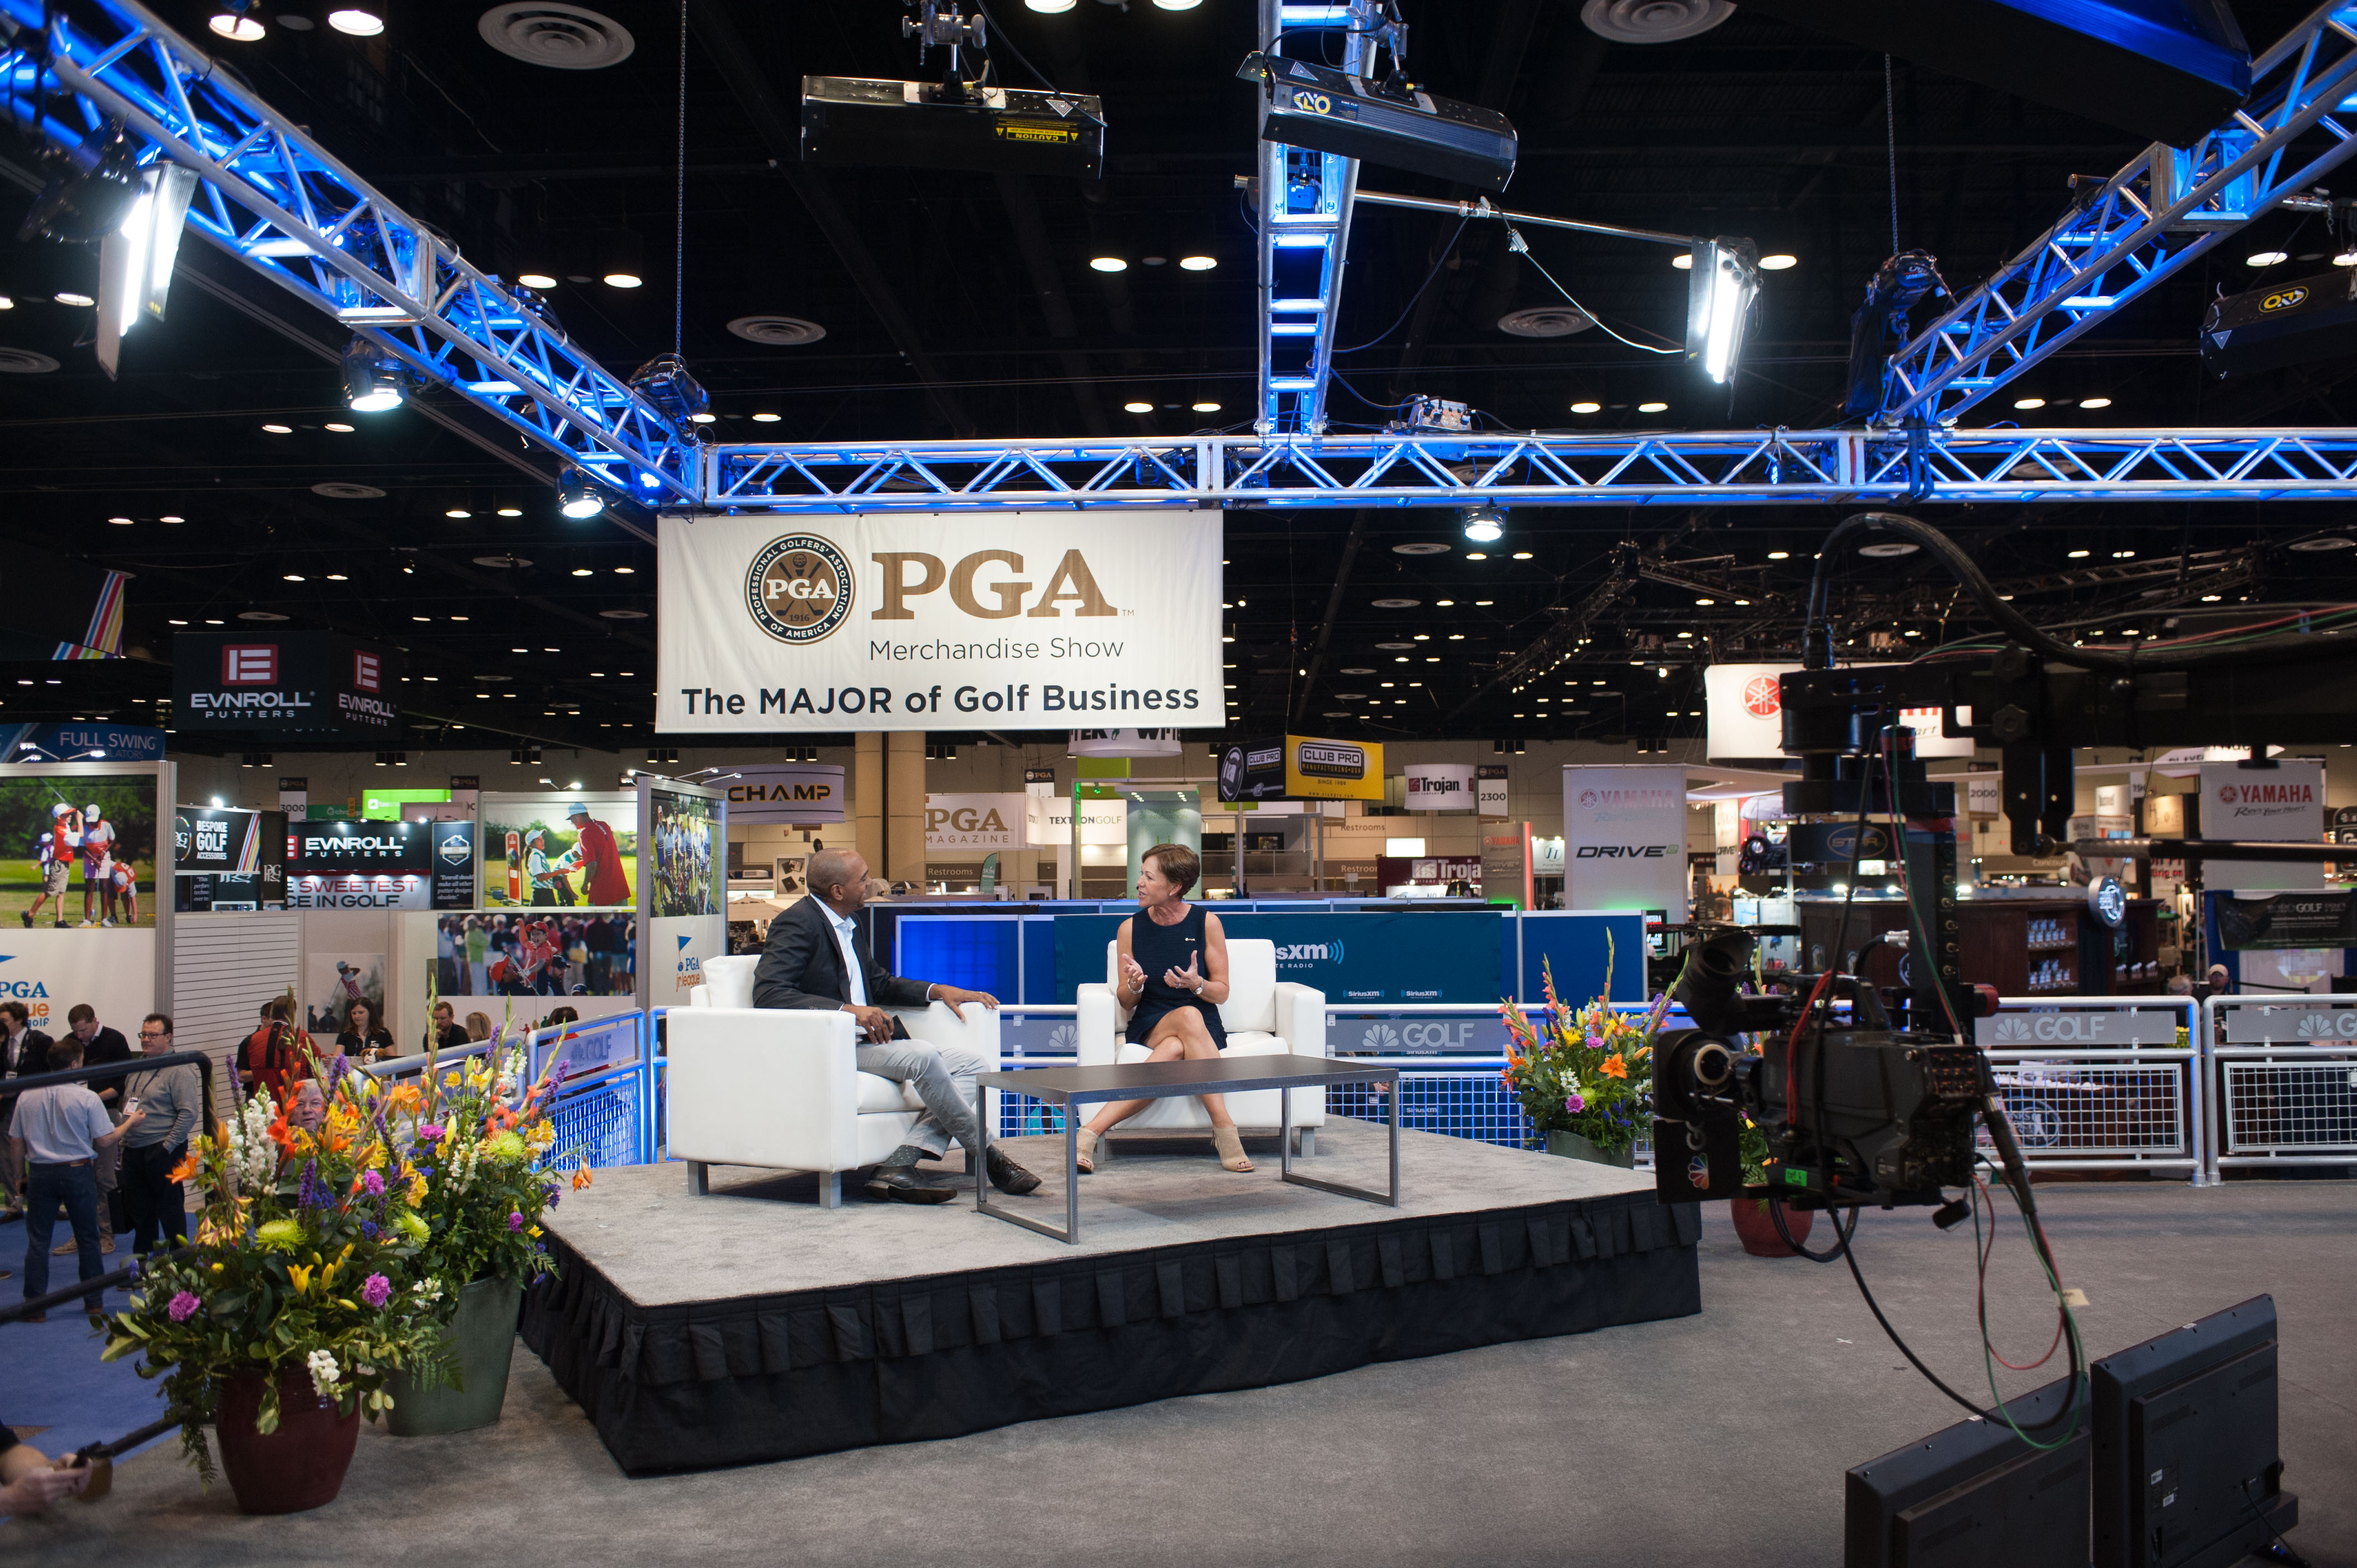 Golf Channel to deliver worldwide coverage of the 2018 PGA Merchandise Show